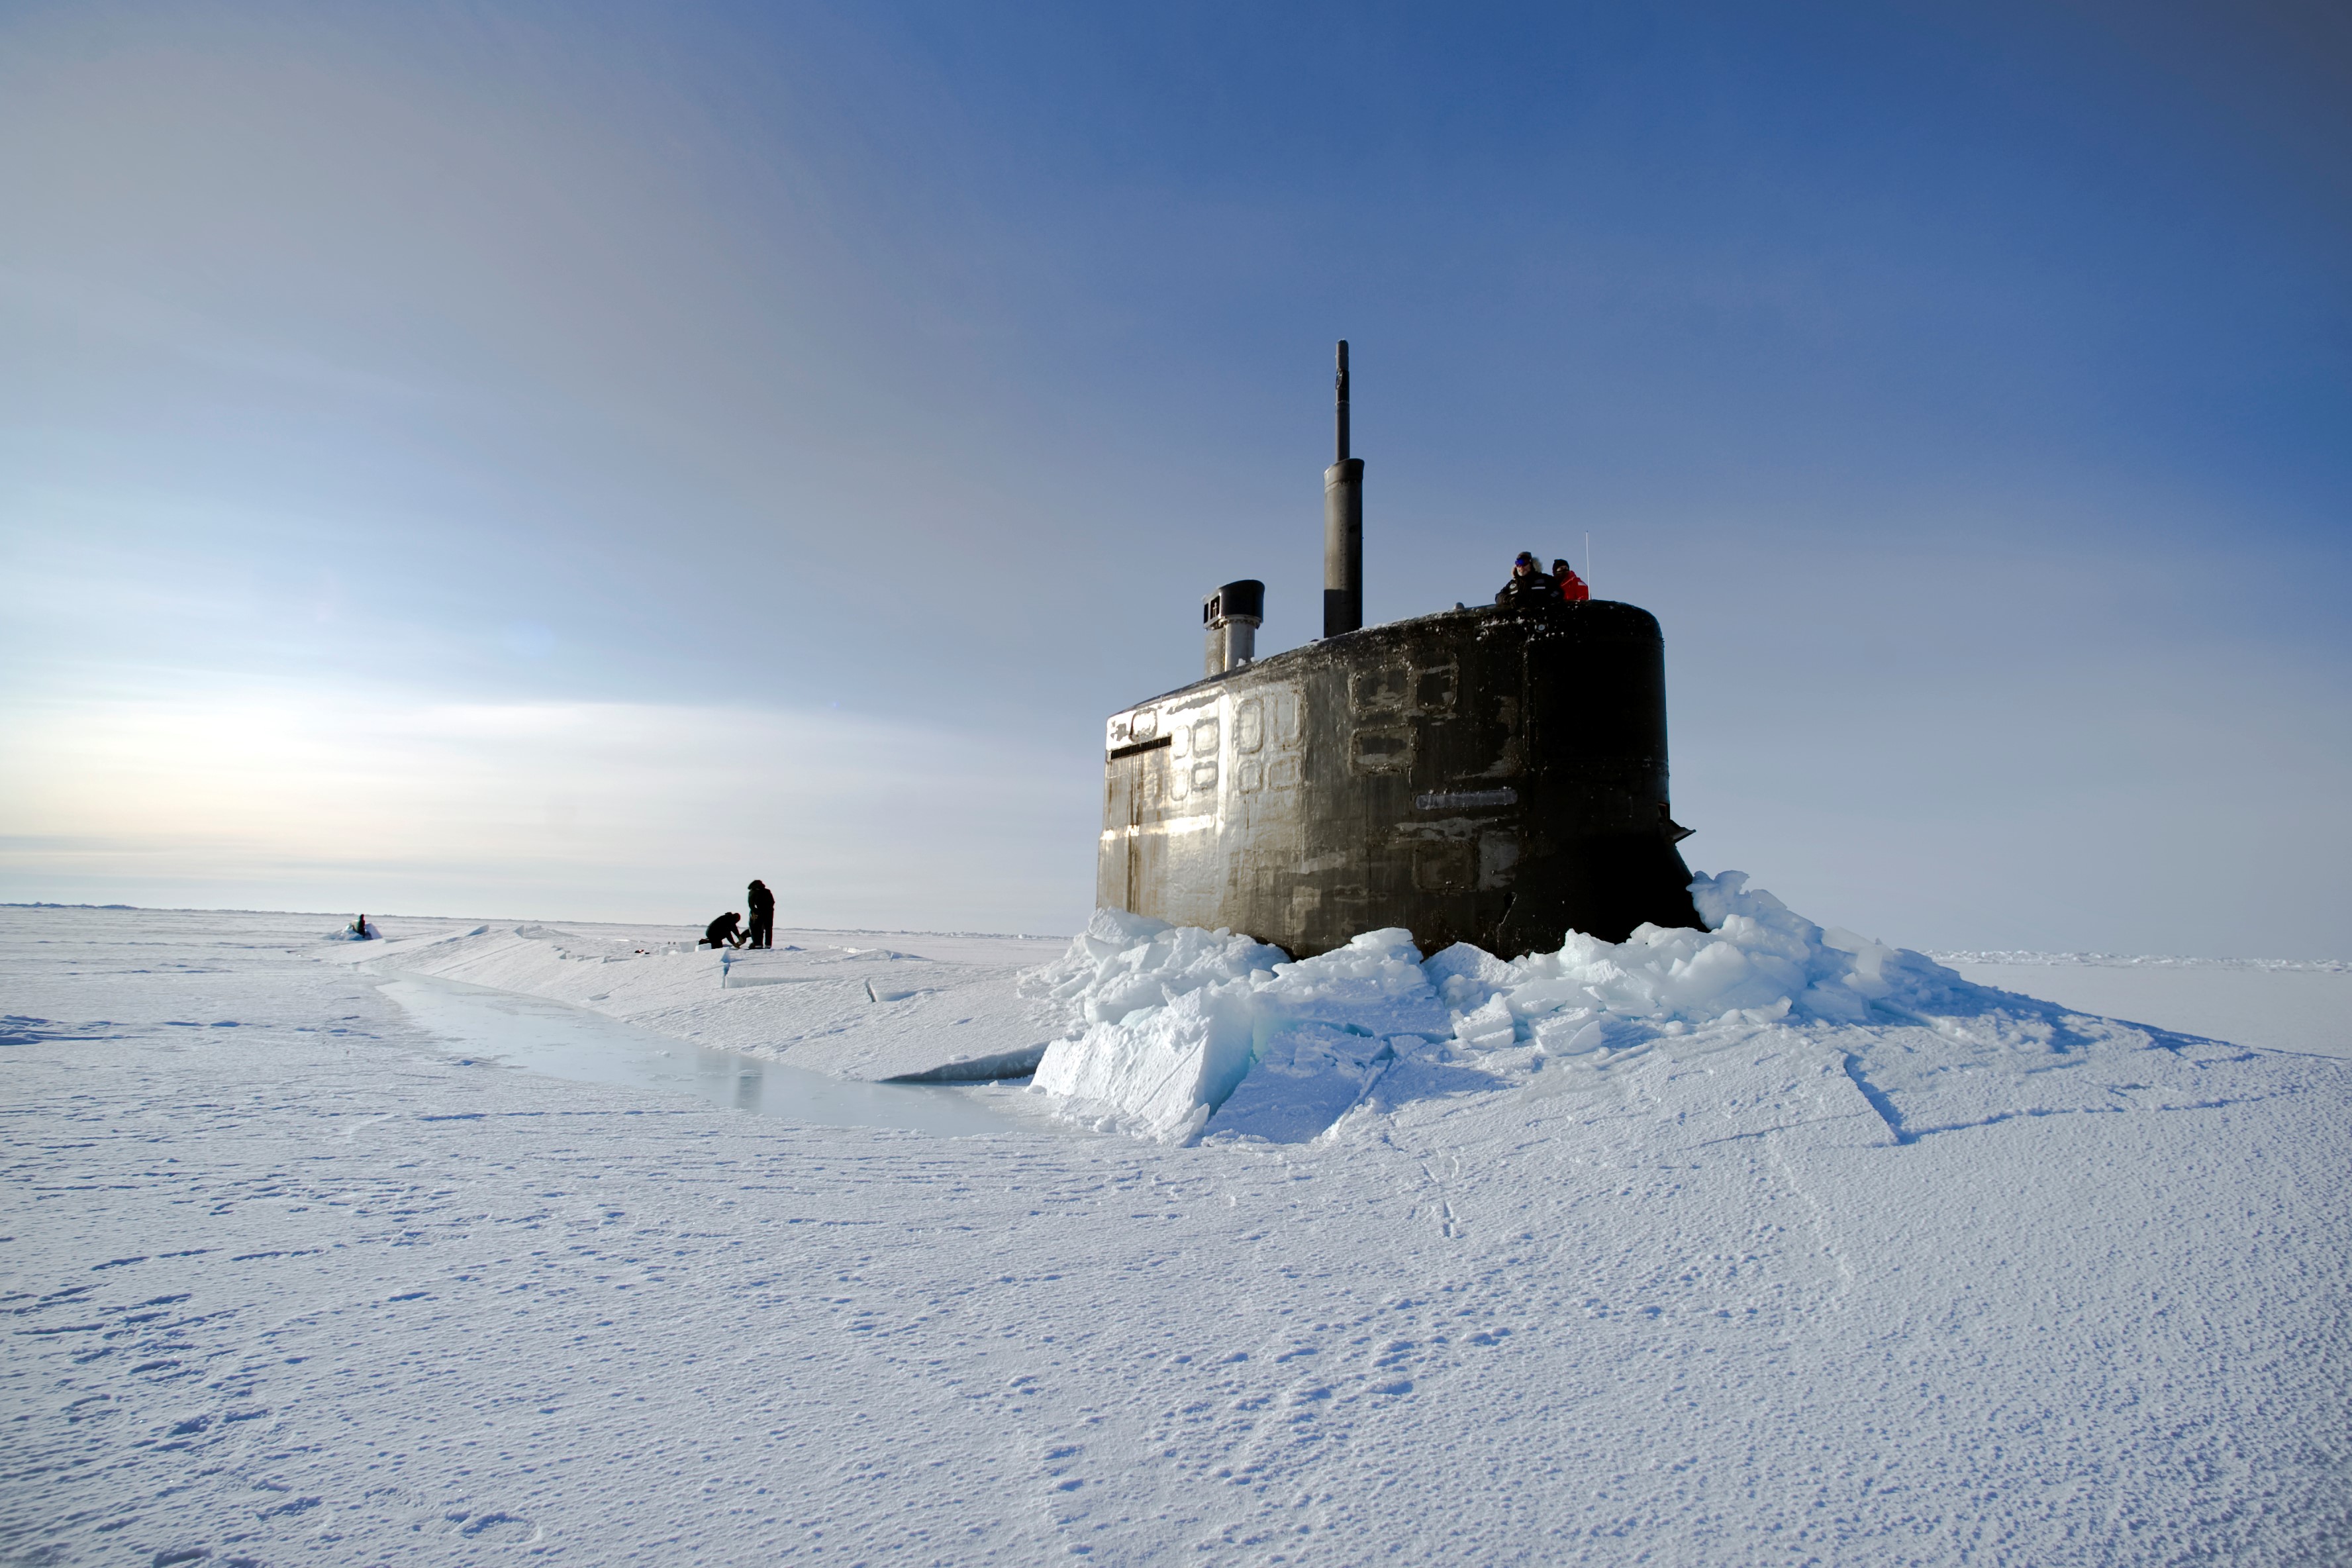 U.S. Military Warns Against Russian Arctic Expansion